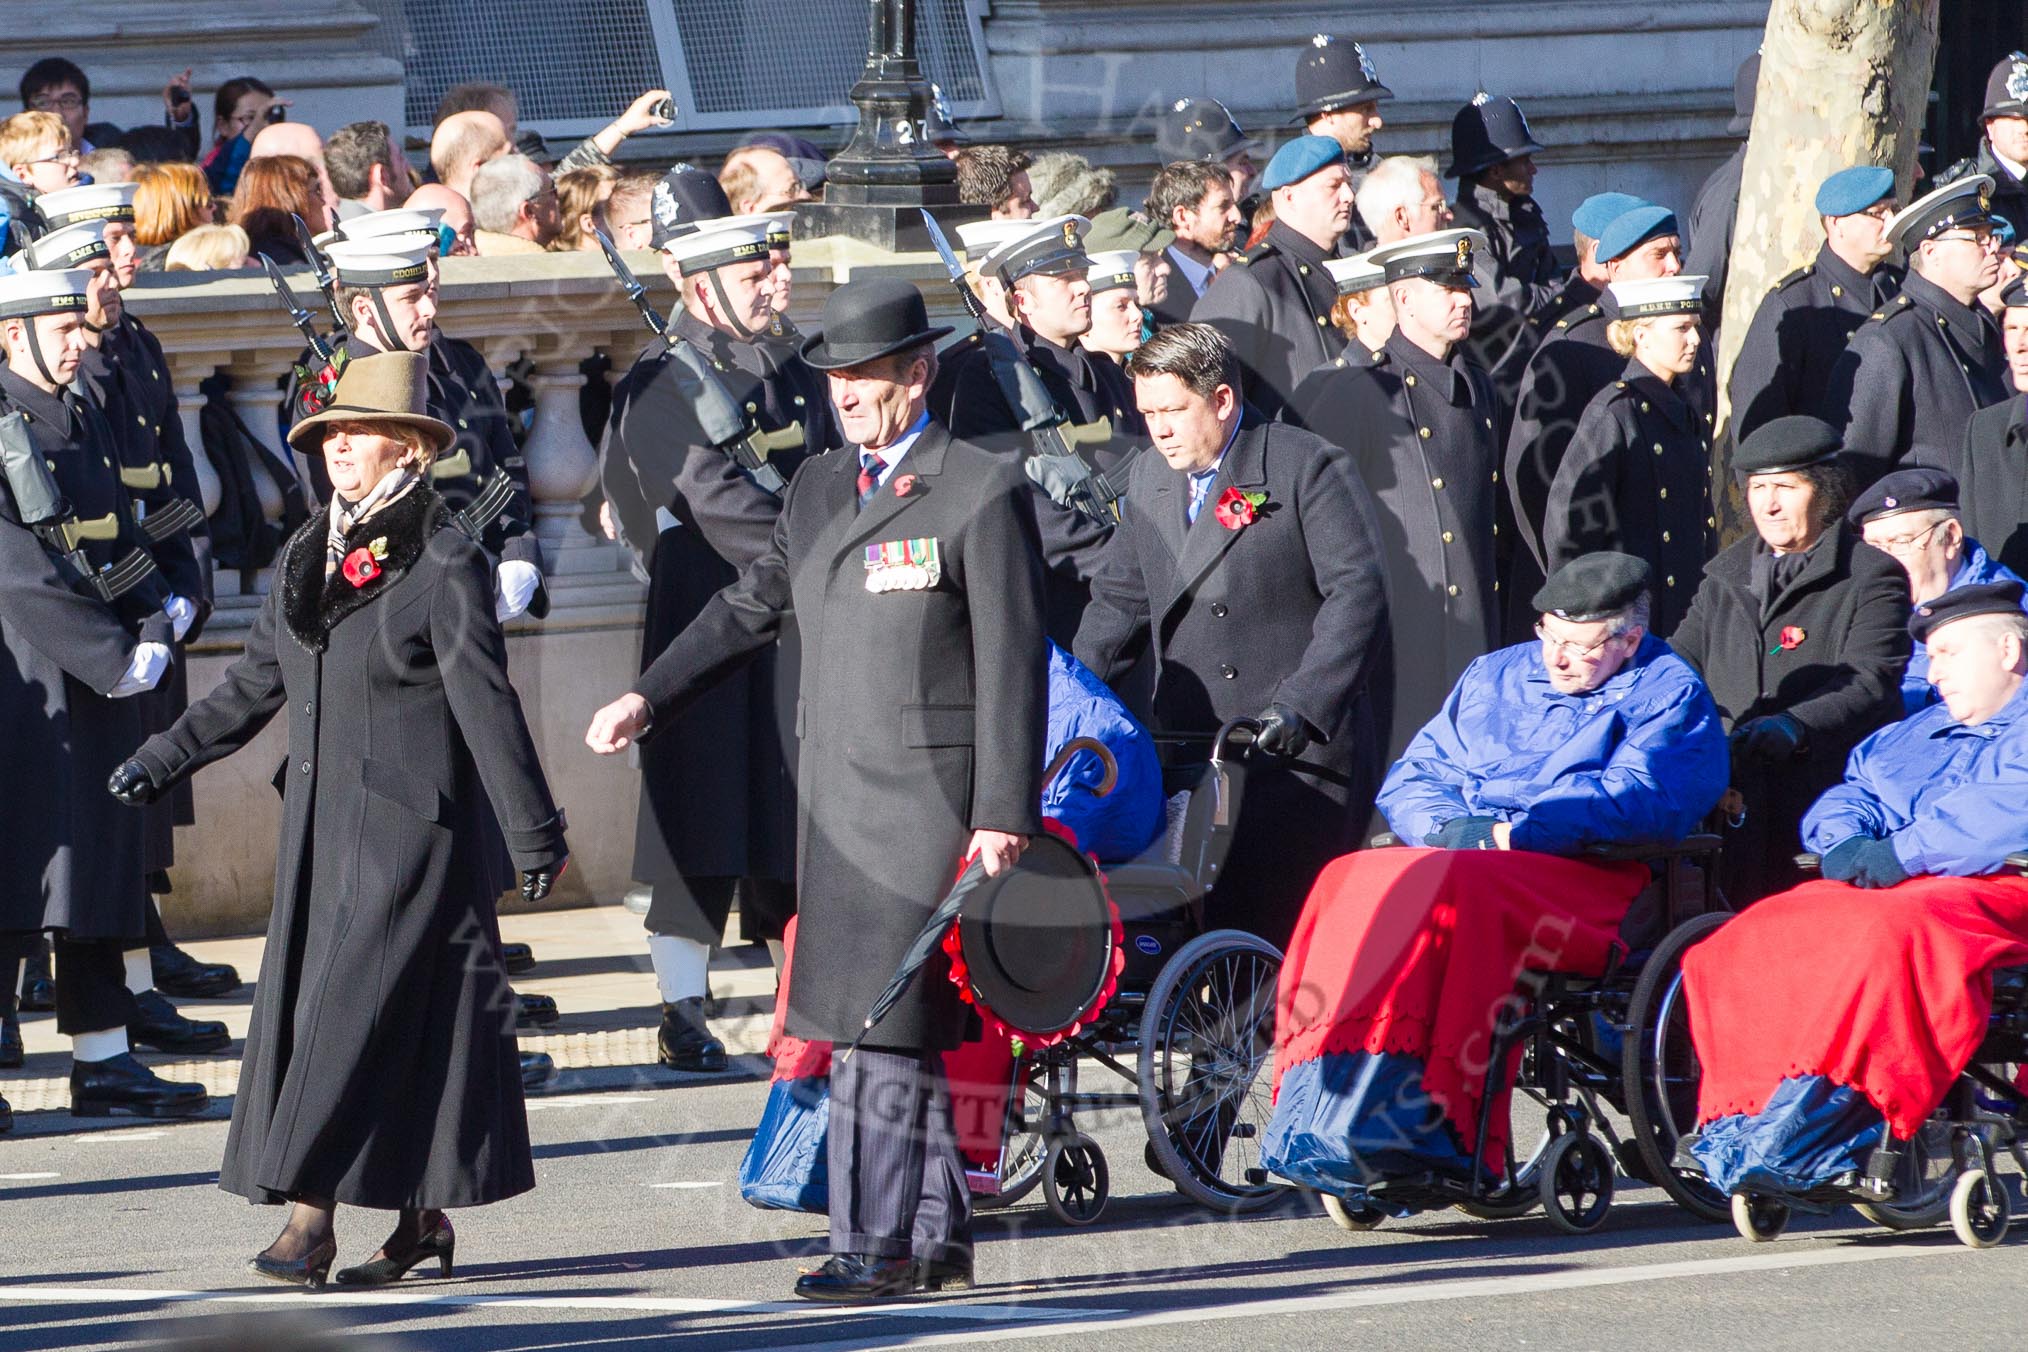 Remembrance Sunday 2012 Cenotaph March Past: Group E44 - Queen Alexandra's Hospital Home for Disabled Ex-Servicemen & Women..
Whitehall, Cenotaph,
London SW1,

United Kingdom,
on 11 November 2012 at 11:44, image #347